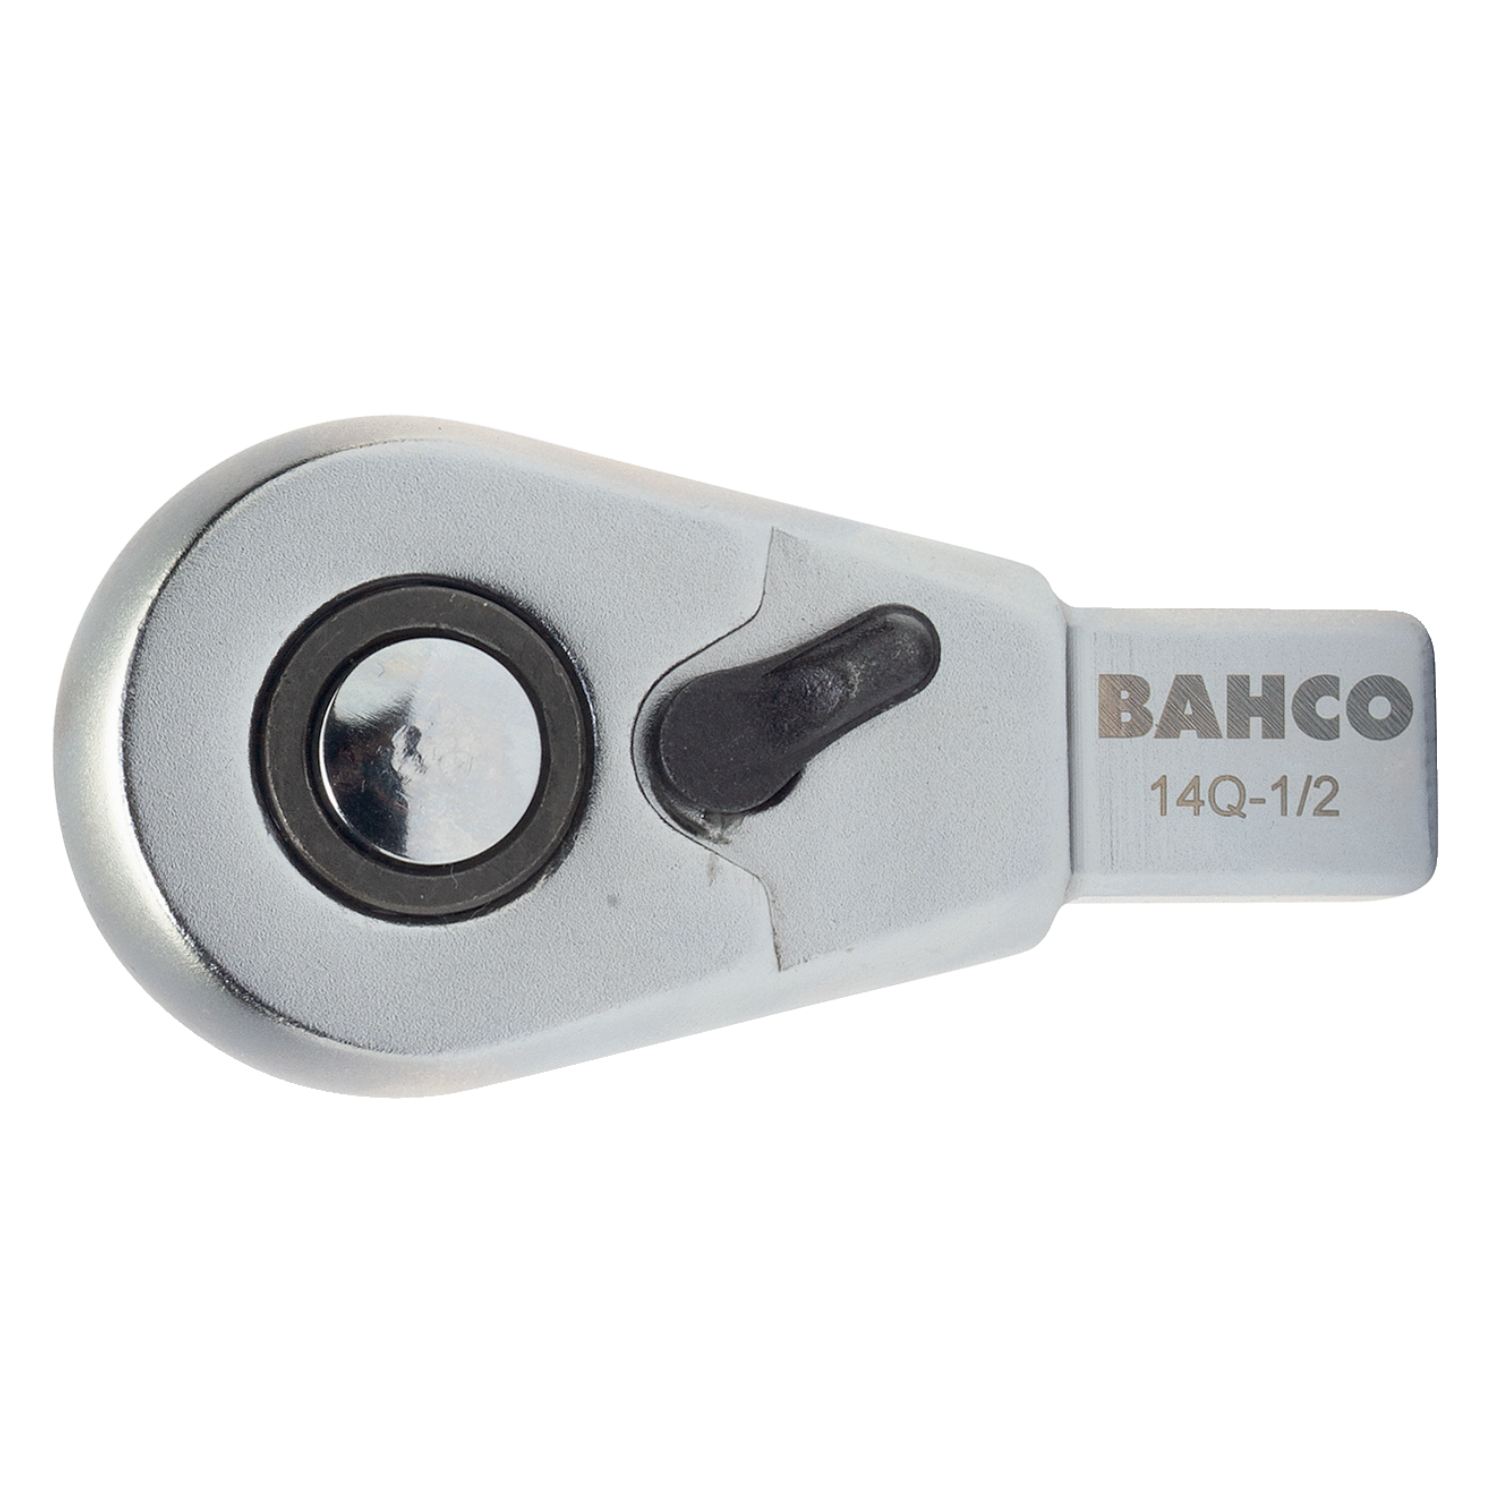 BAHCO 9 14Q Pear Ratchet Head with Quick-Release and Connector - Premium Ratchet Head from BAHCO - Shop now at Yew Aik.